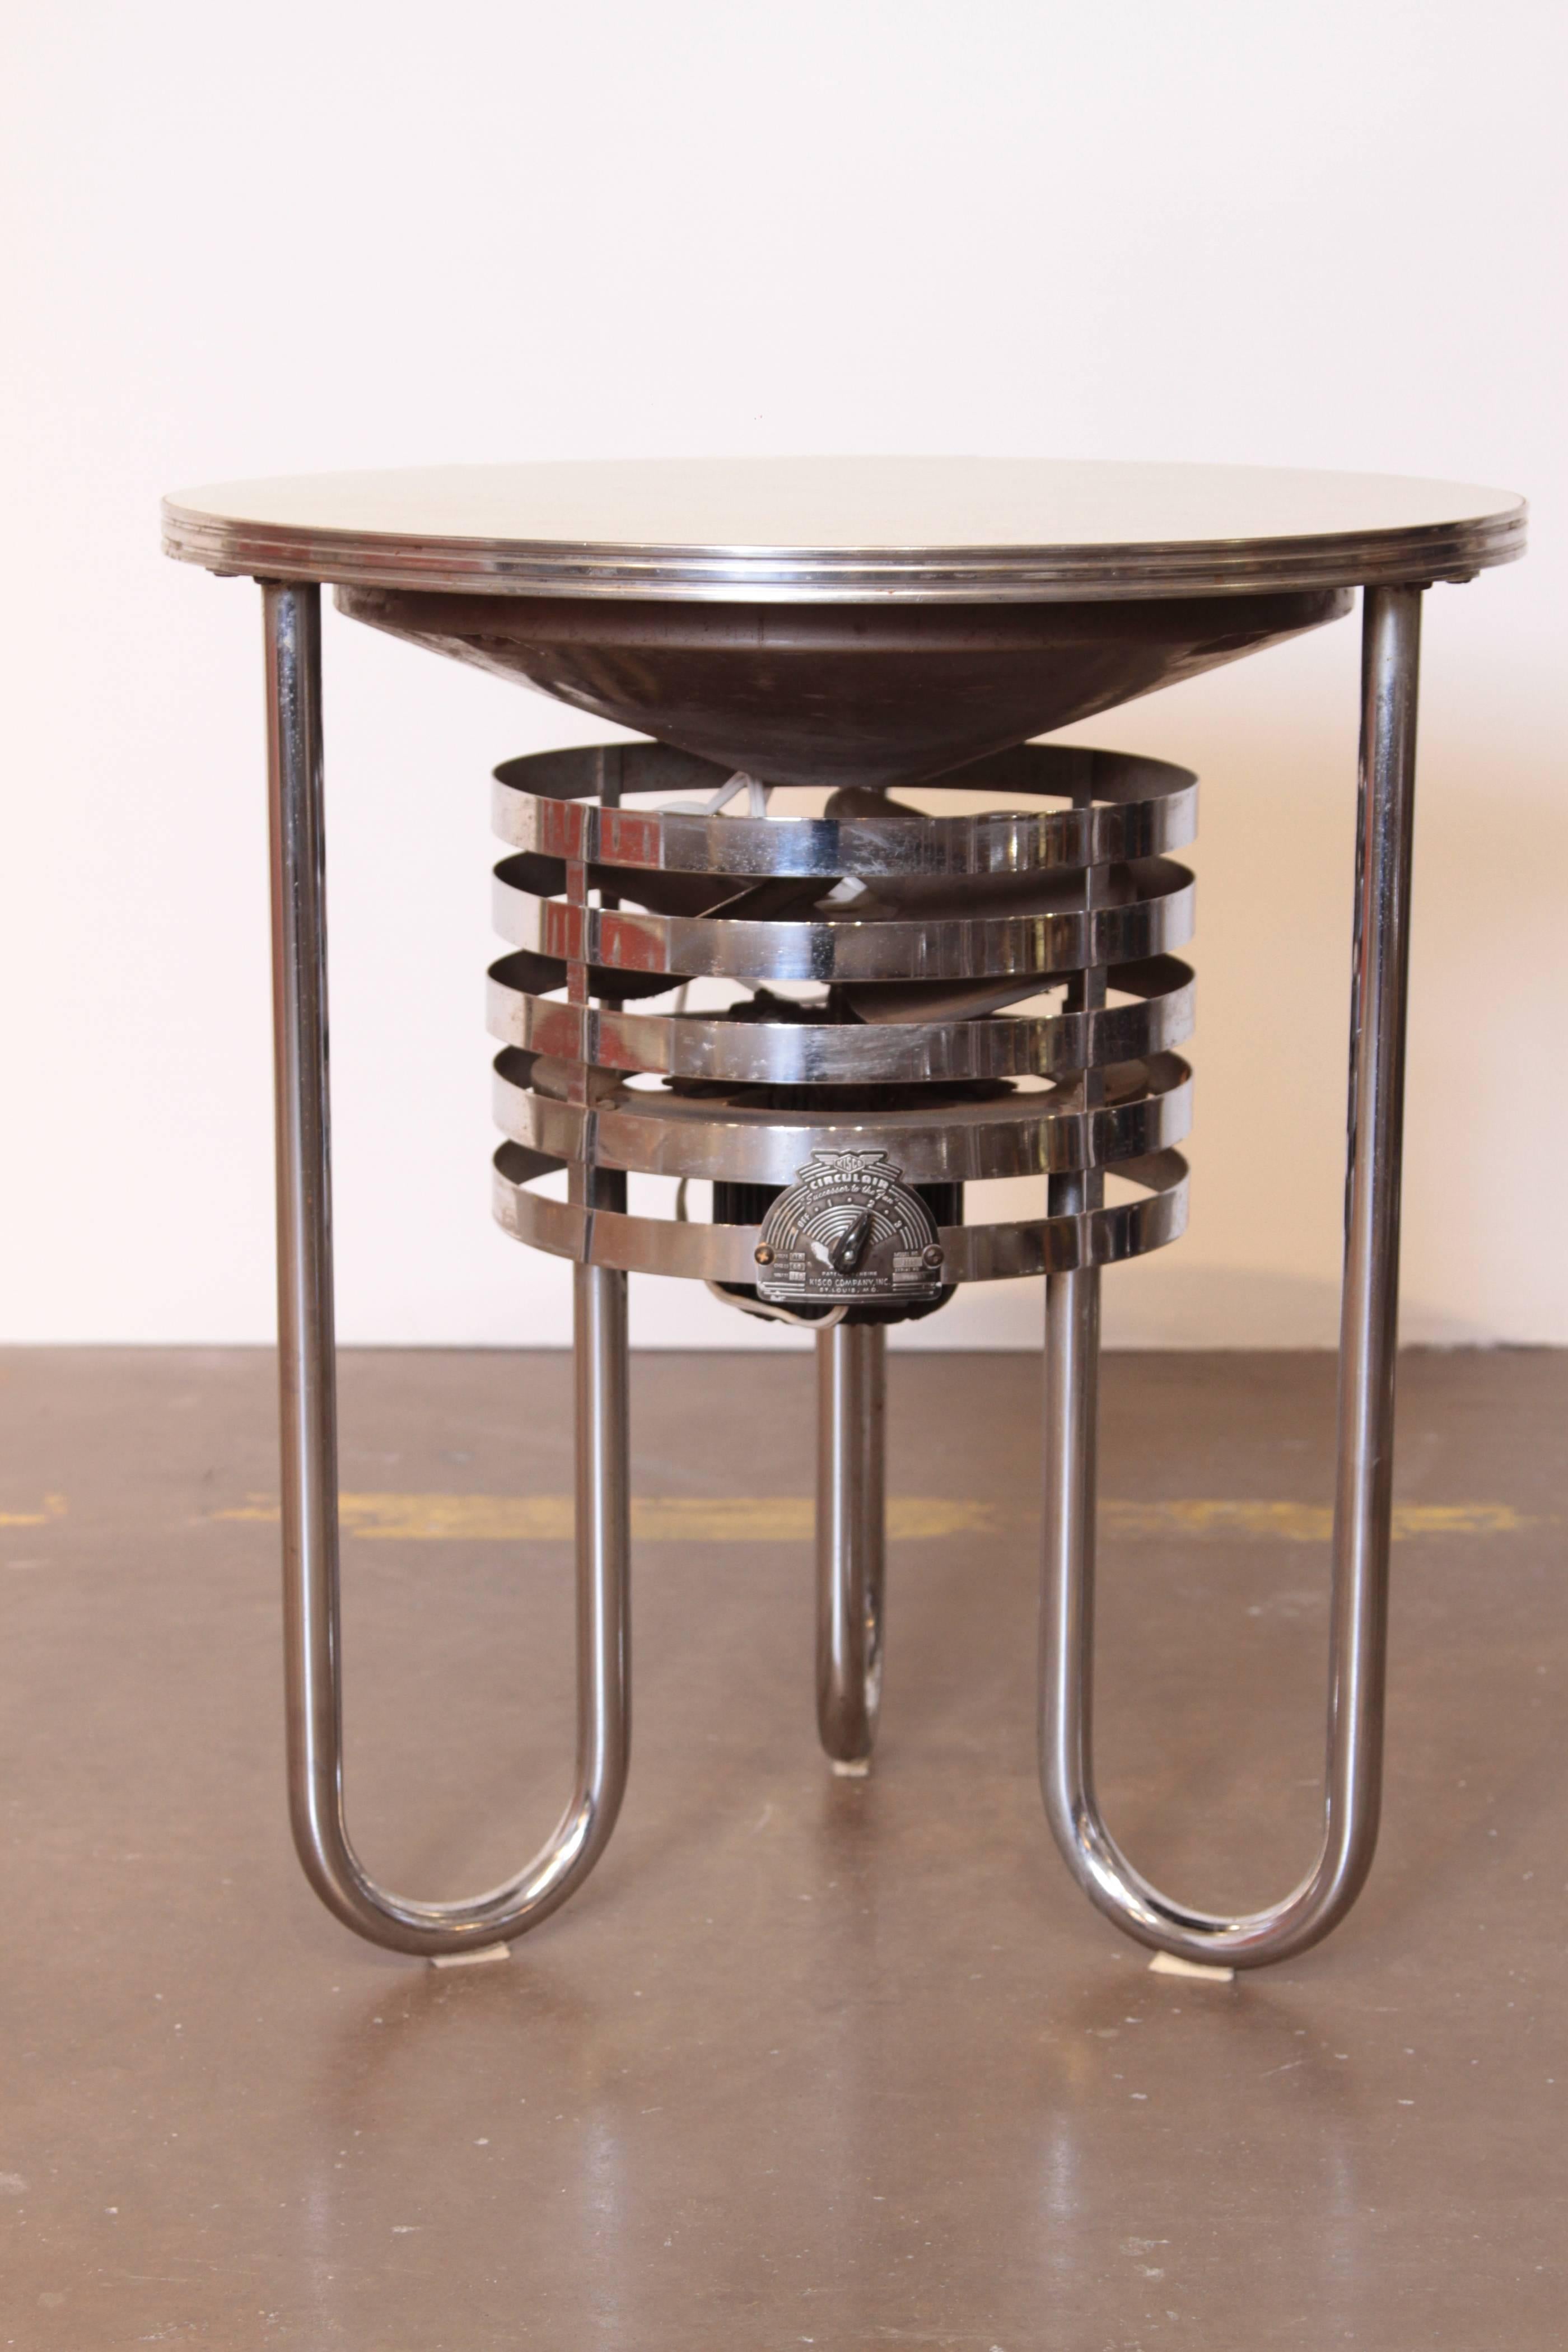 Machine Age Art Deco royal chrome fan table royal metal and Kisco fan company royal chrome. 
Classic streamline bent-tube design, original wheat Formica top and chrome. 

Fan is restored. Kisco circulair three-speed model.
Chrome and top